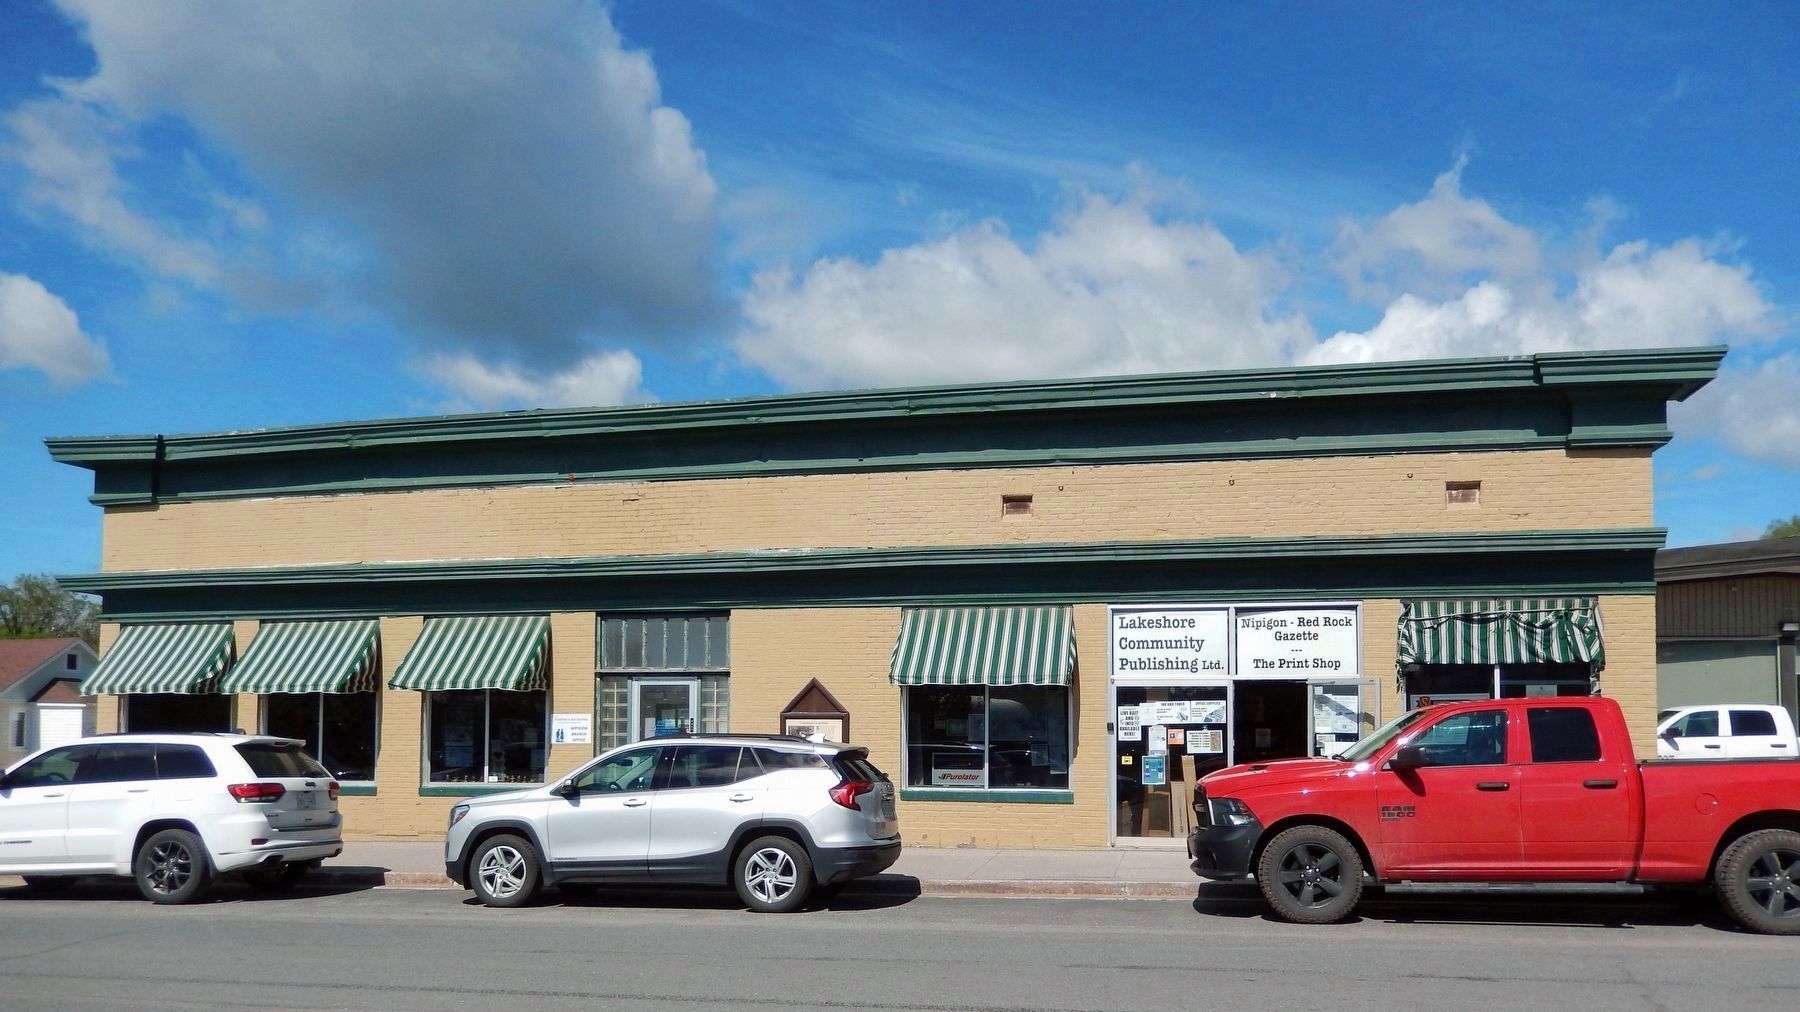 Children Aid Society & Nipigon-Red Rock Gazette Store Fronts image. Click for full size.